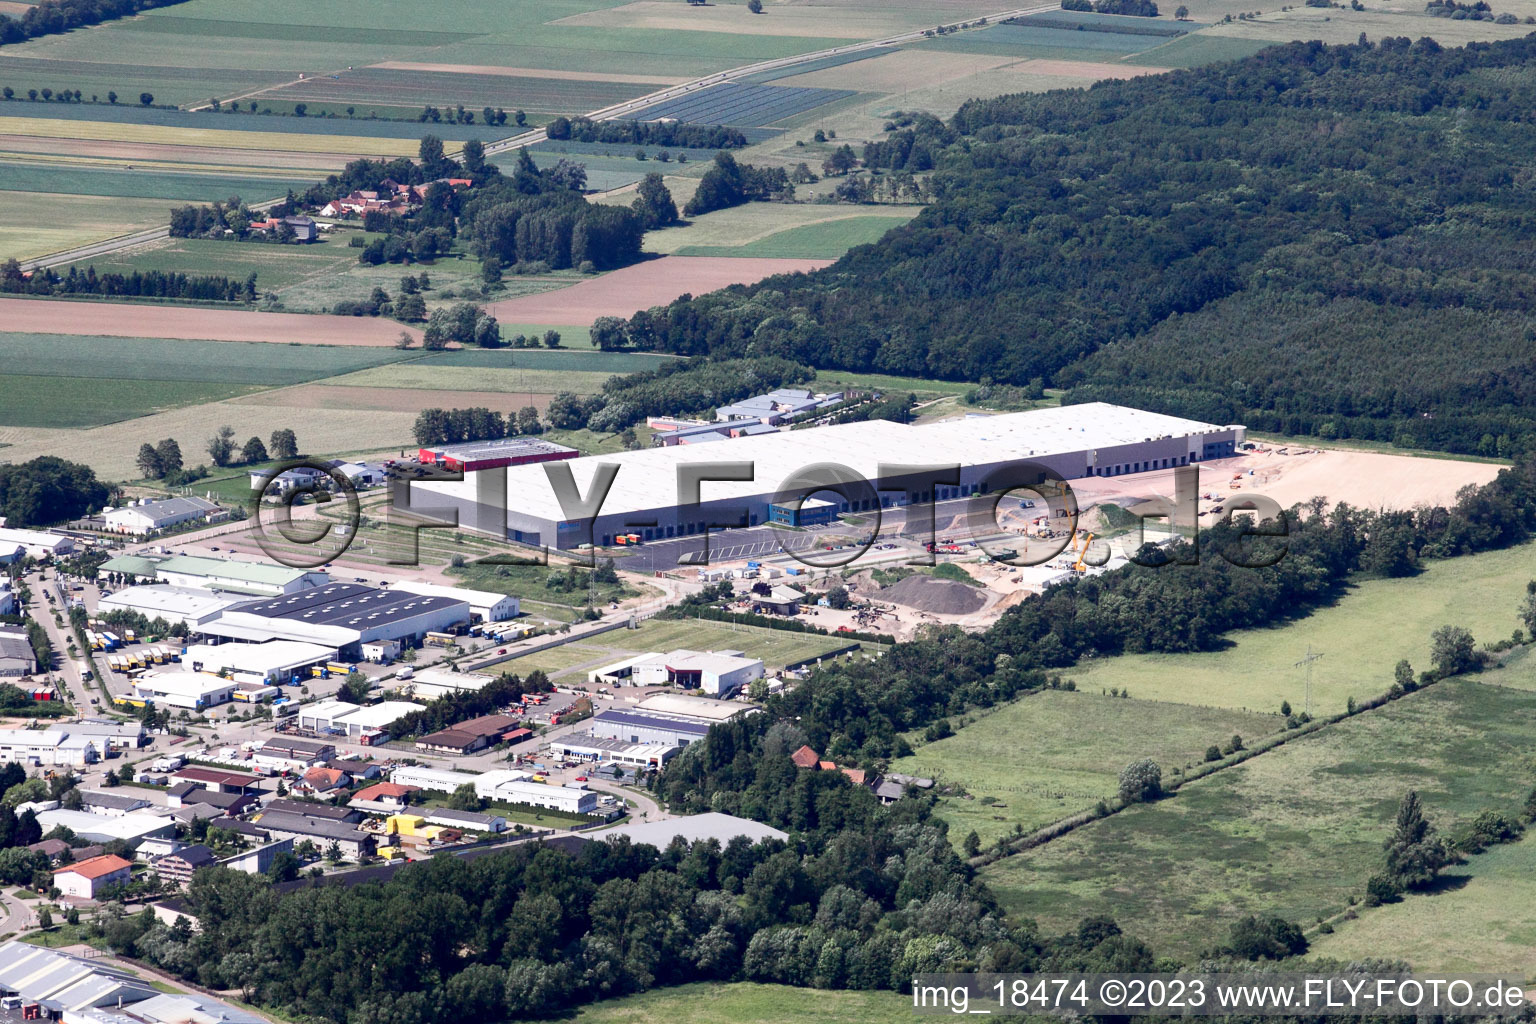 Oblique view of Coincidence logistics center in the district Minderslachen in Kandel in the state Rhineland-Palatinate, Germany